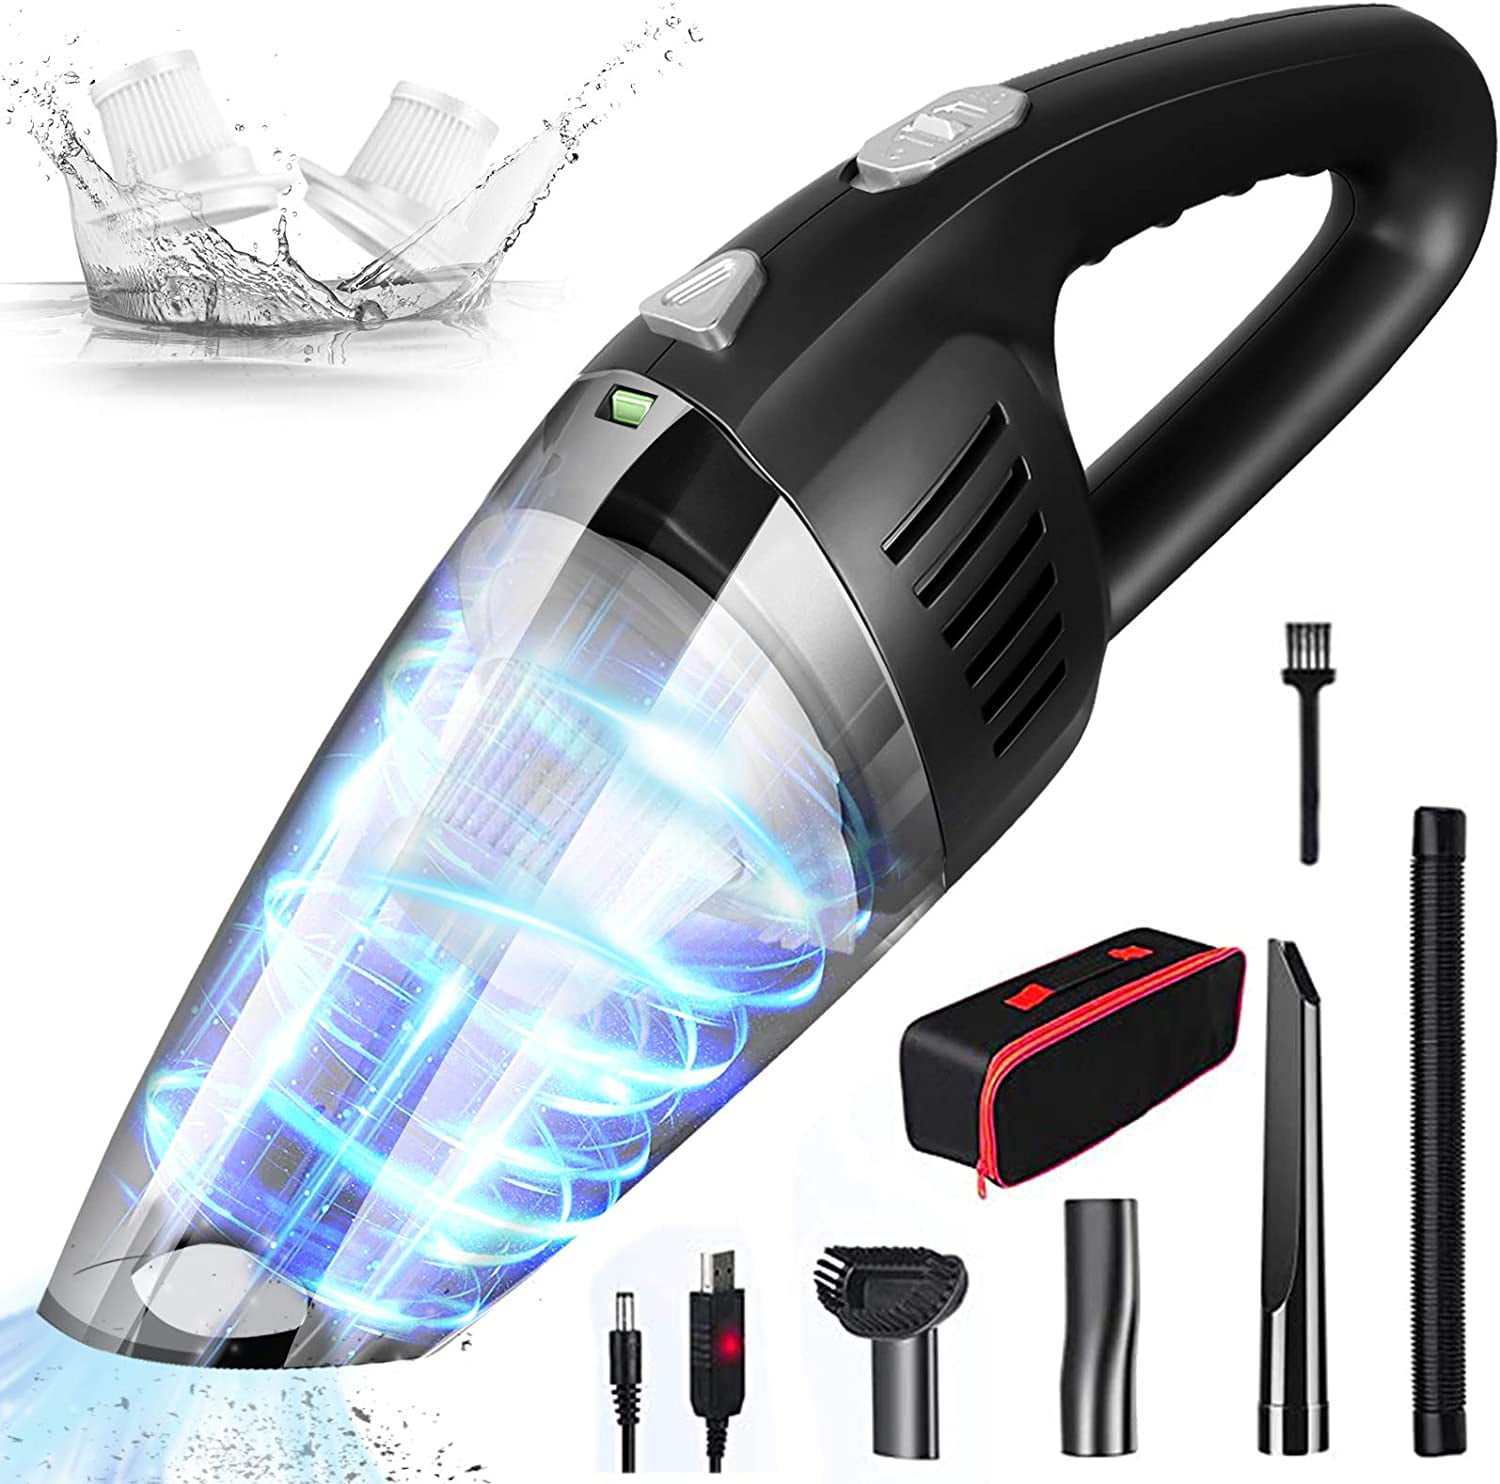 Powerful Cordless Car Vacuum Cleaner Home Rechargeable Wet&Dry Handheld Duster 